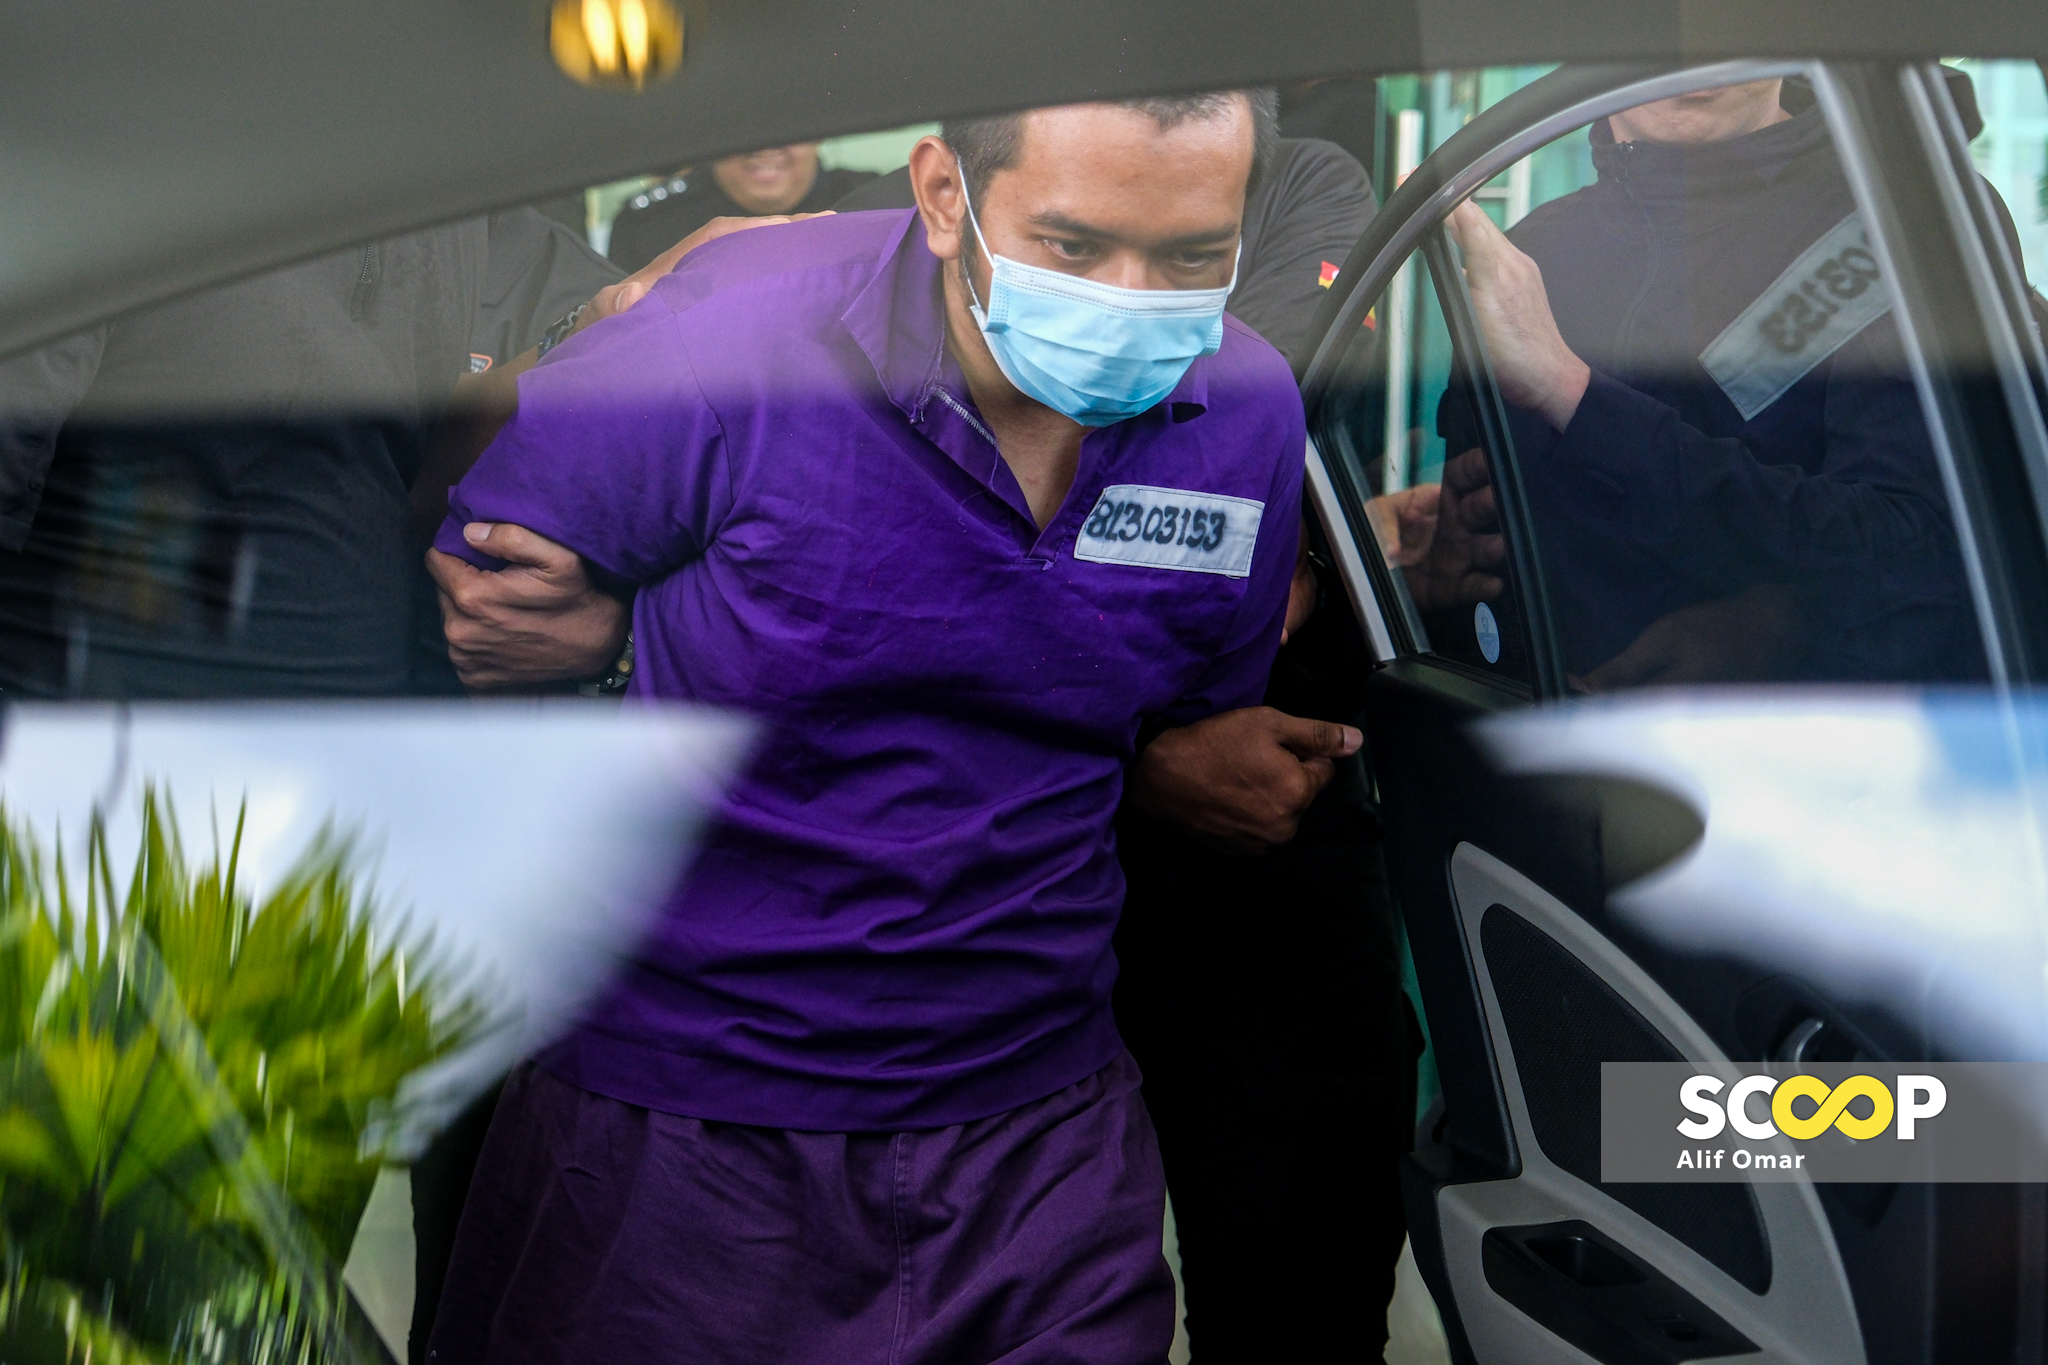 KLIA shooting: suspect underwent health check-up a week before incident